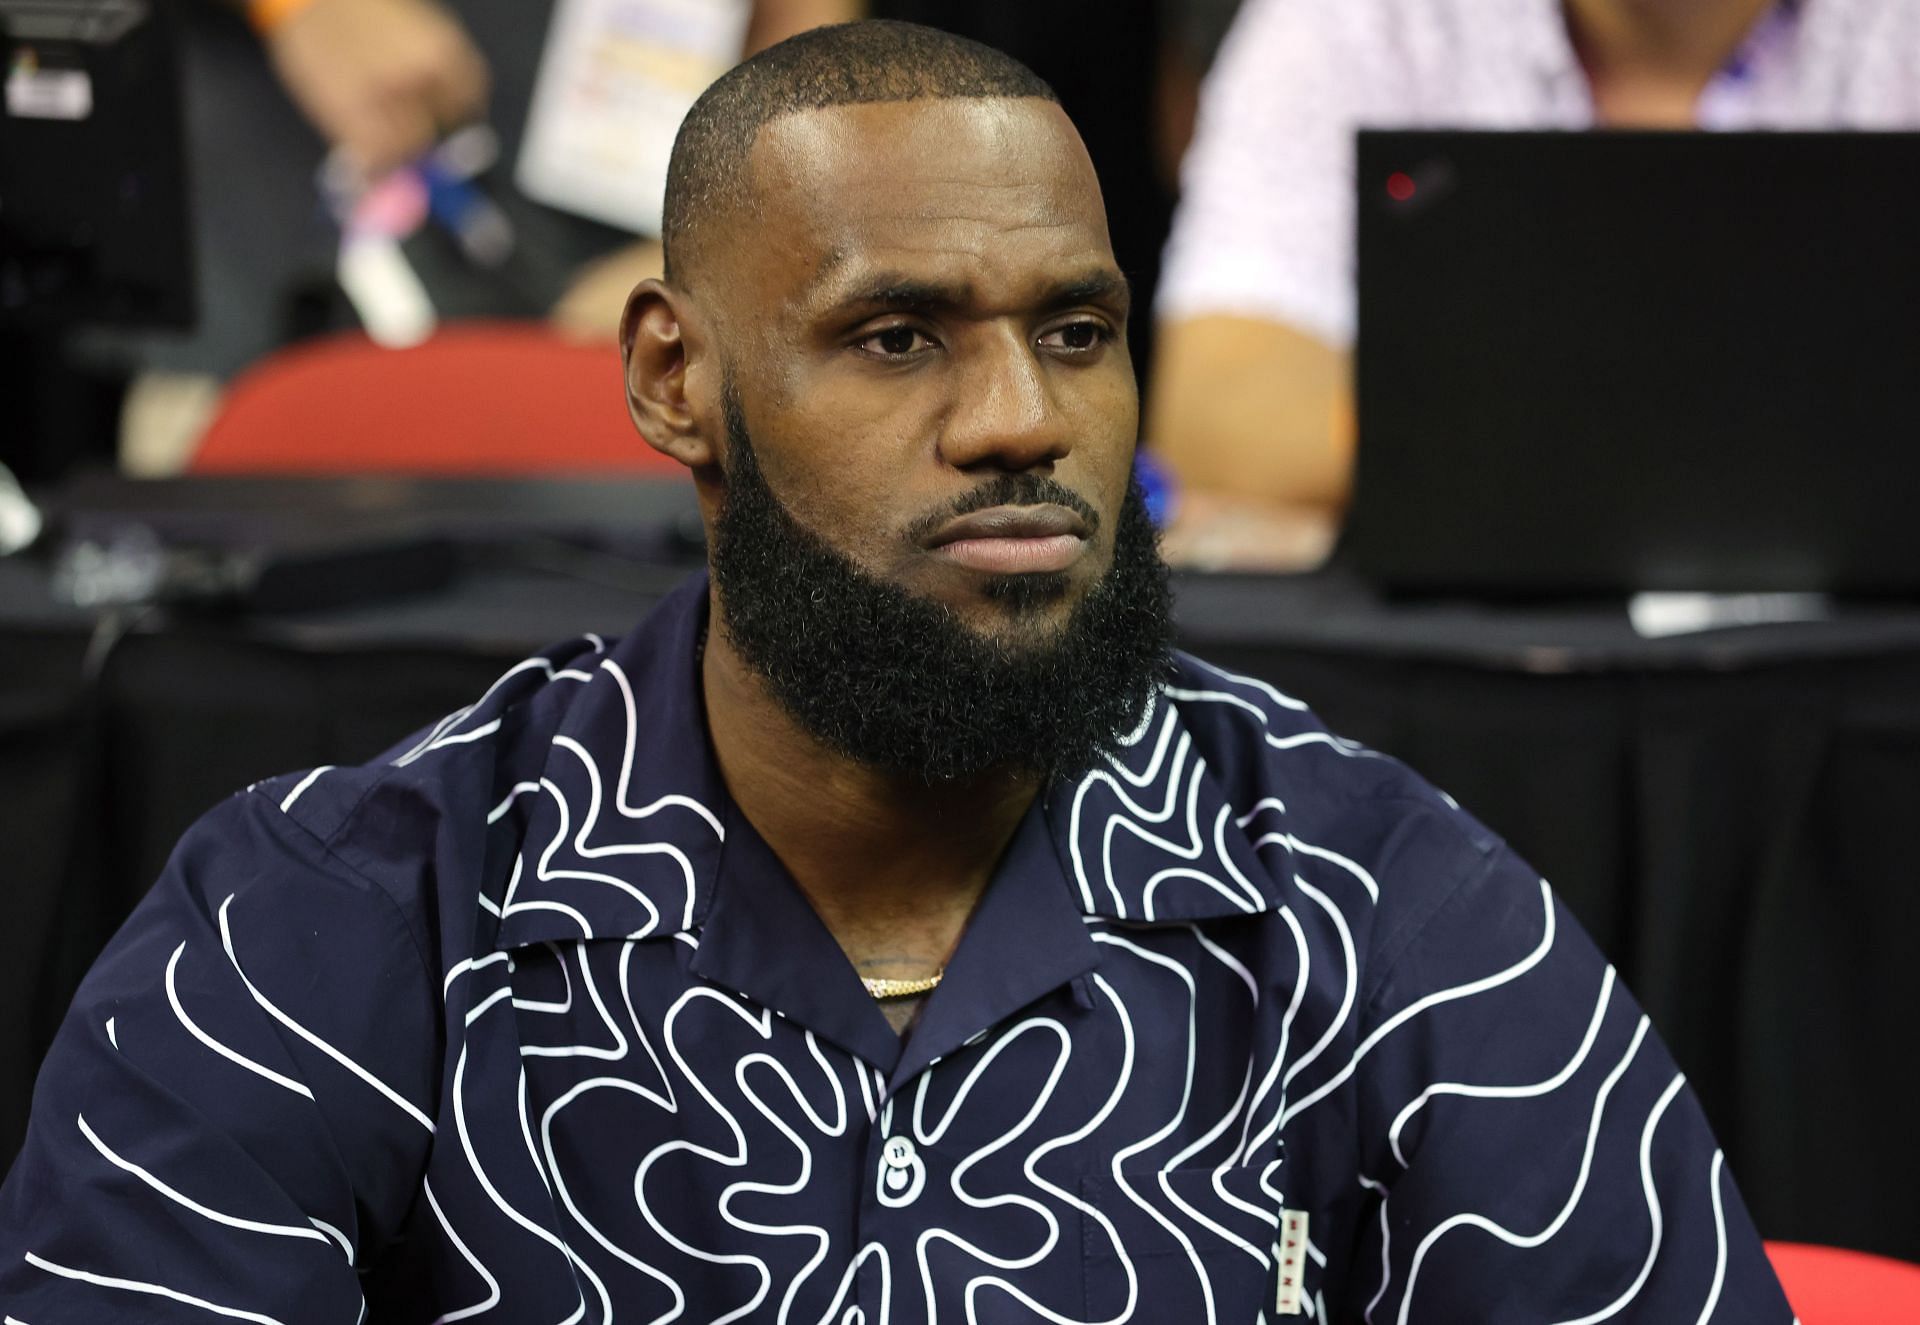 LeBron James in attendance to watch the LA Lakers at the Summer League